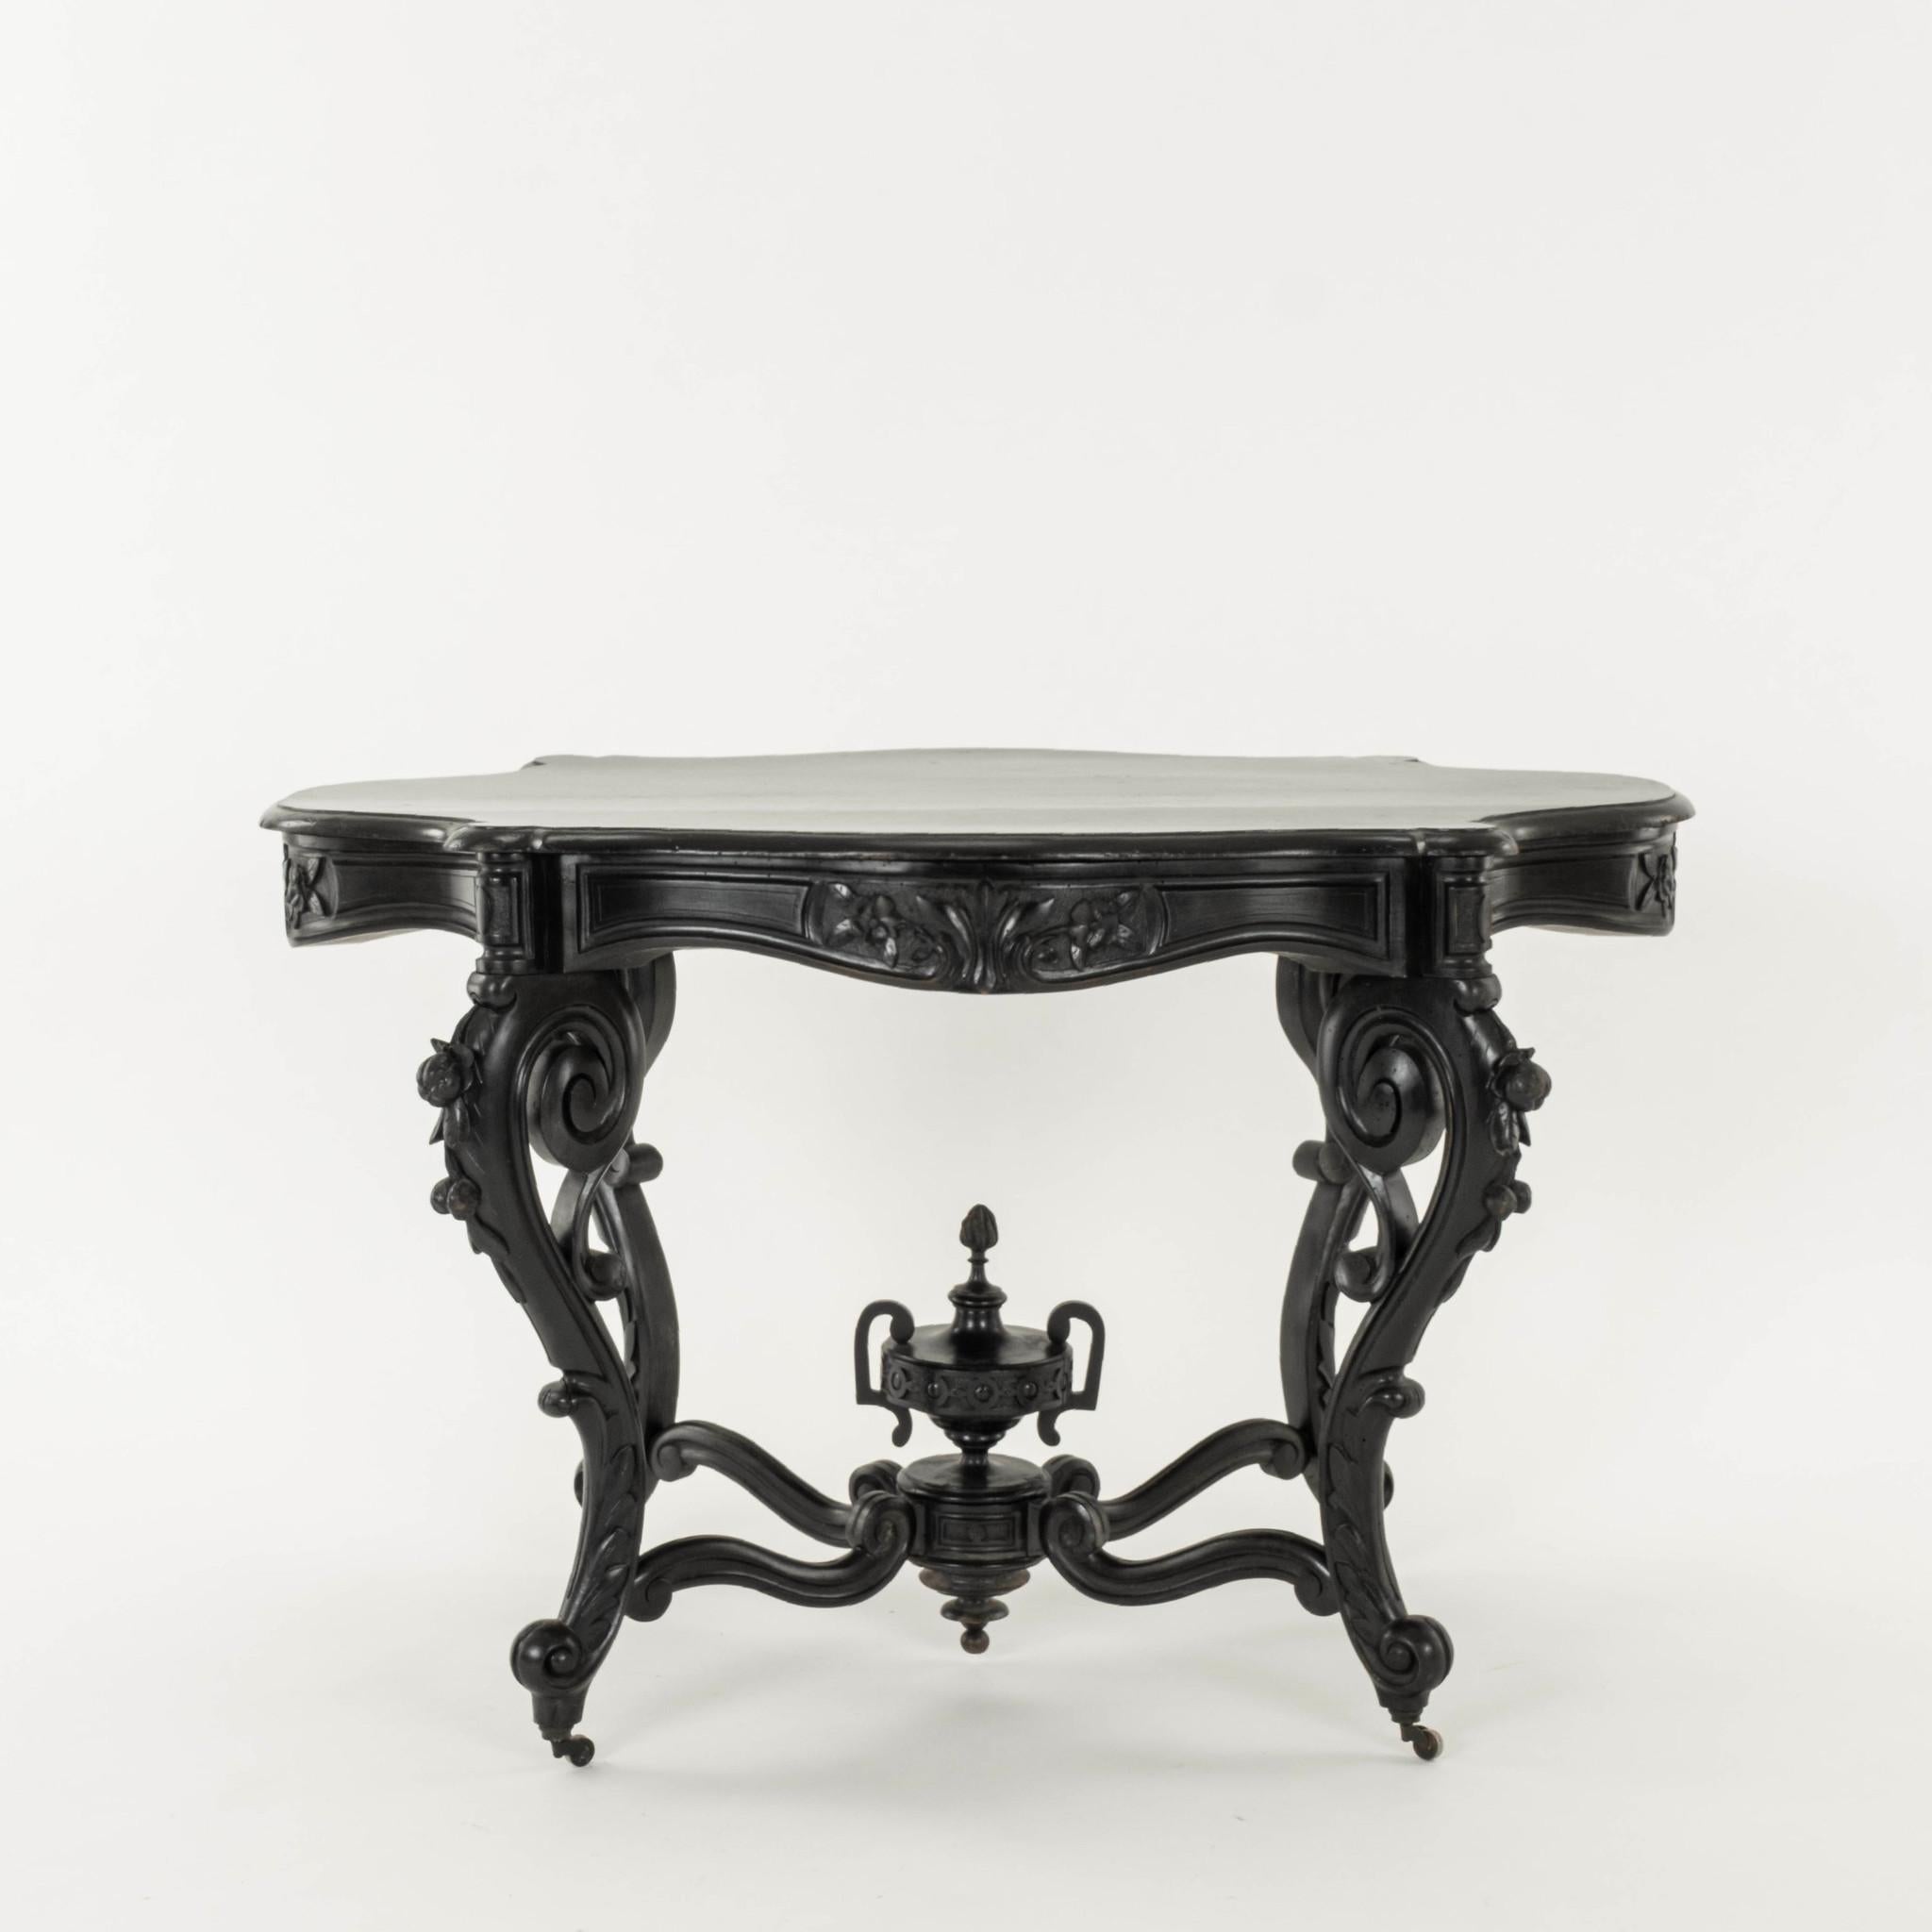 Period Napoleon III violin table. Elegantly carved, featuring, fruit, foliage and classical elements on casters.